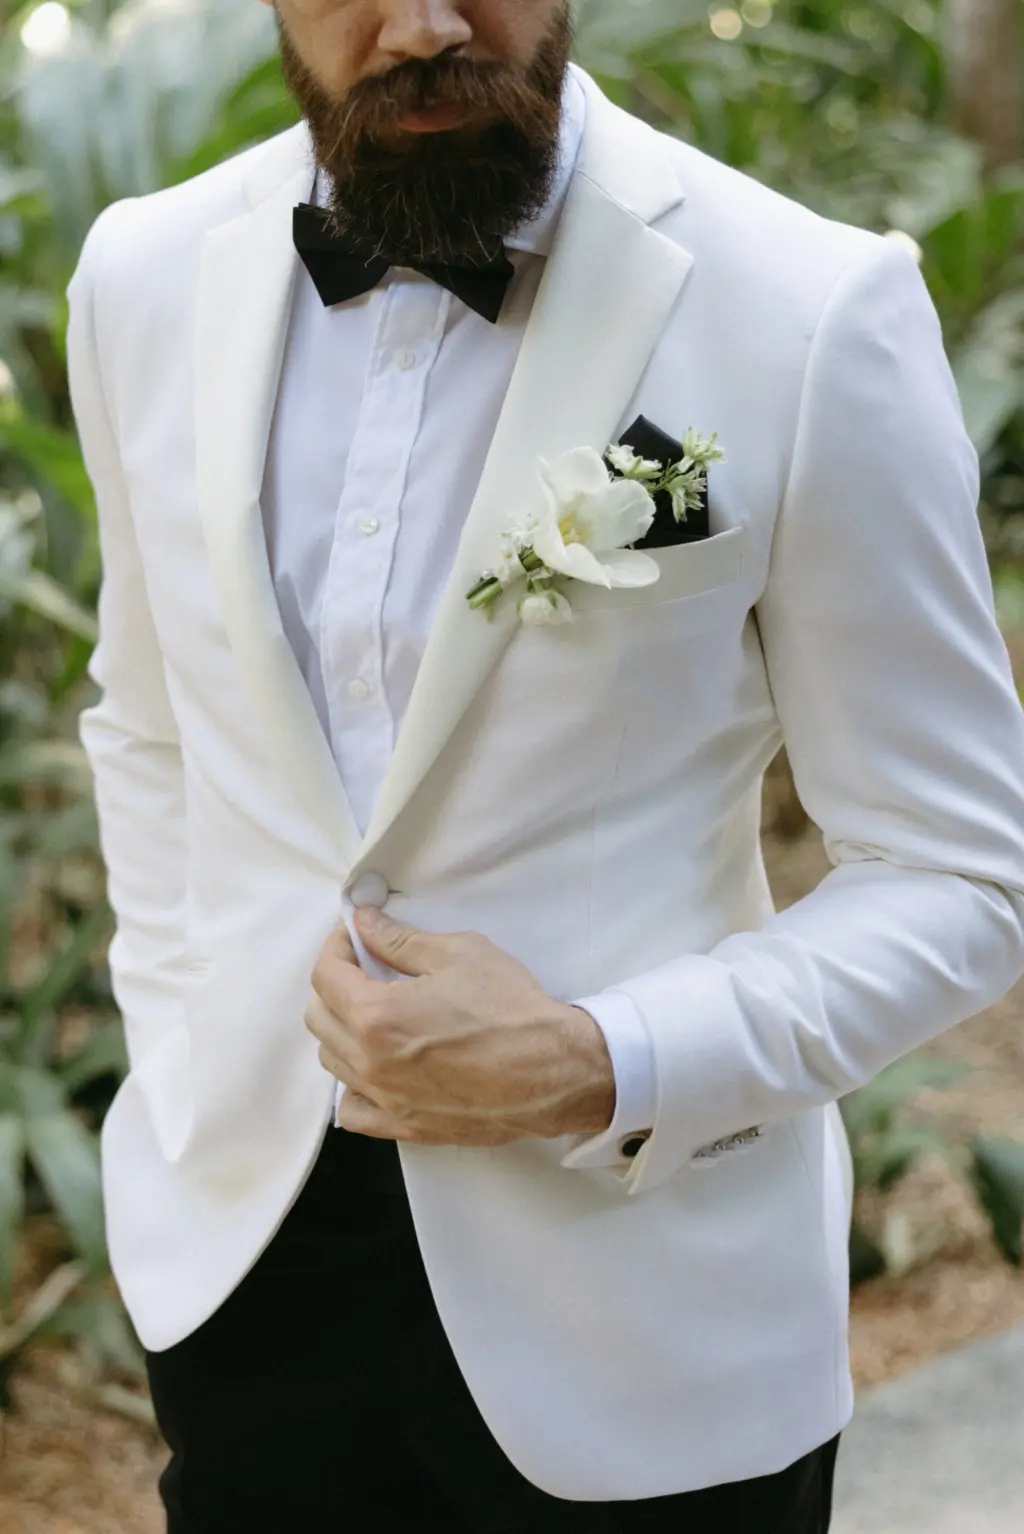 Black and White Wedding Groom Tuxedo and Bowtie Ideas | White Cosmos Boutonniere Inspiration